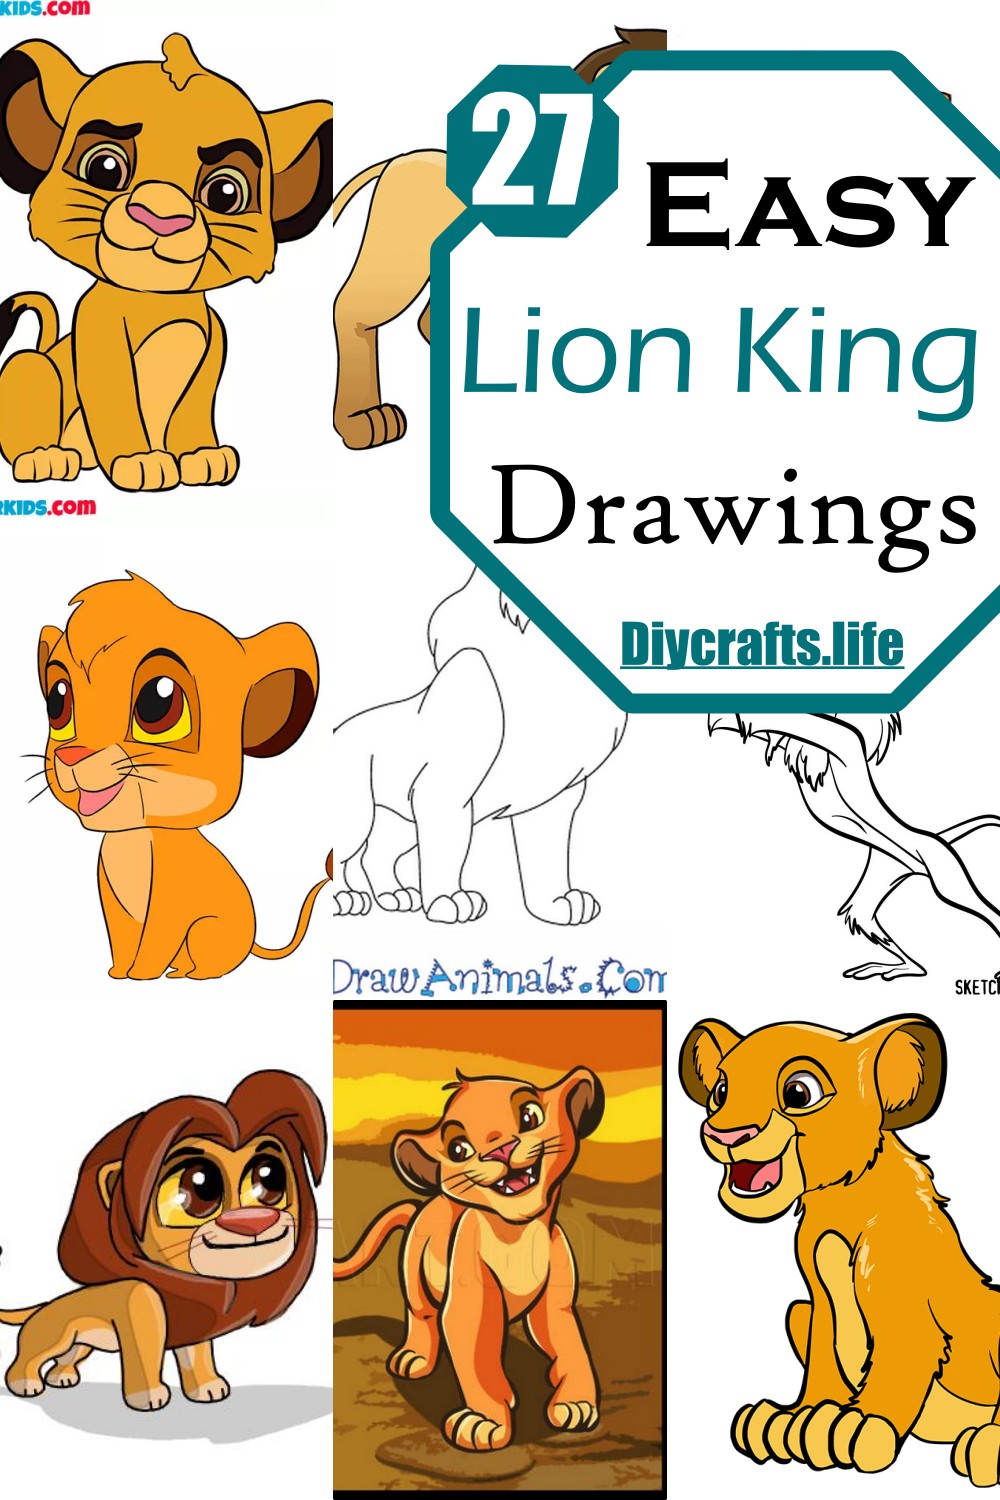 Easy Lion King Drawings